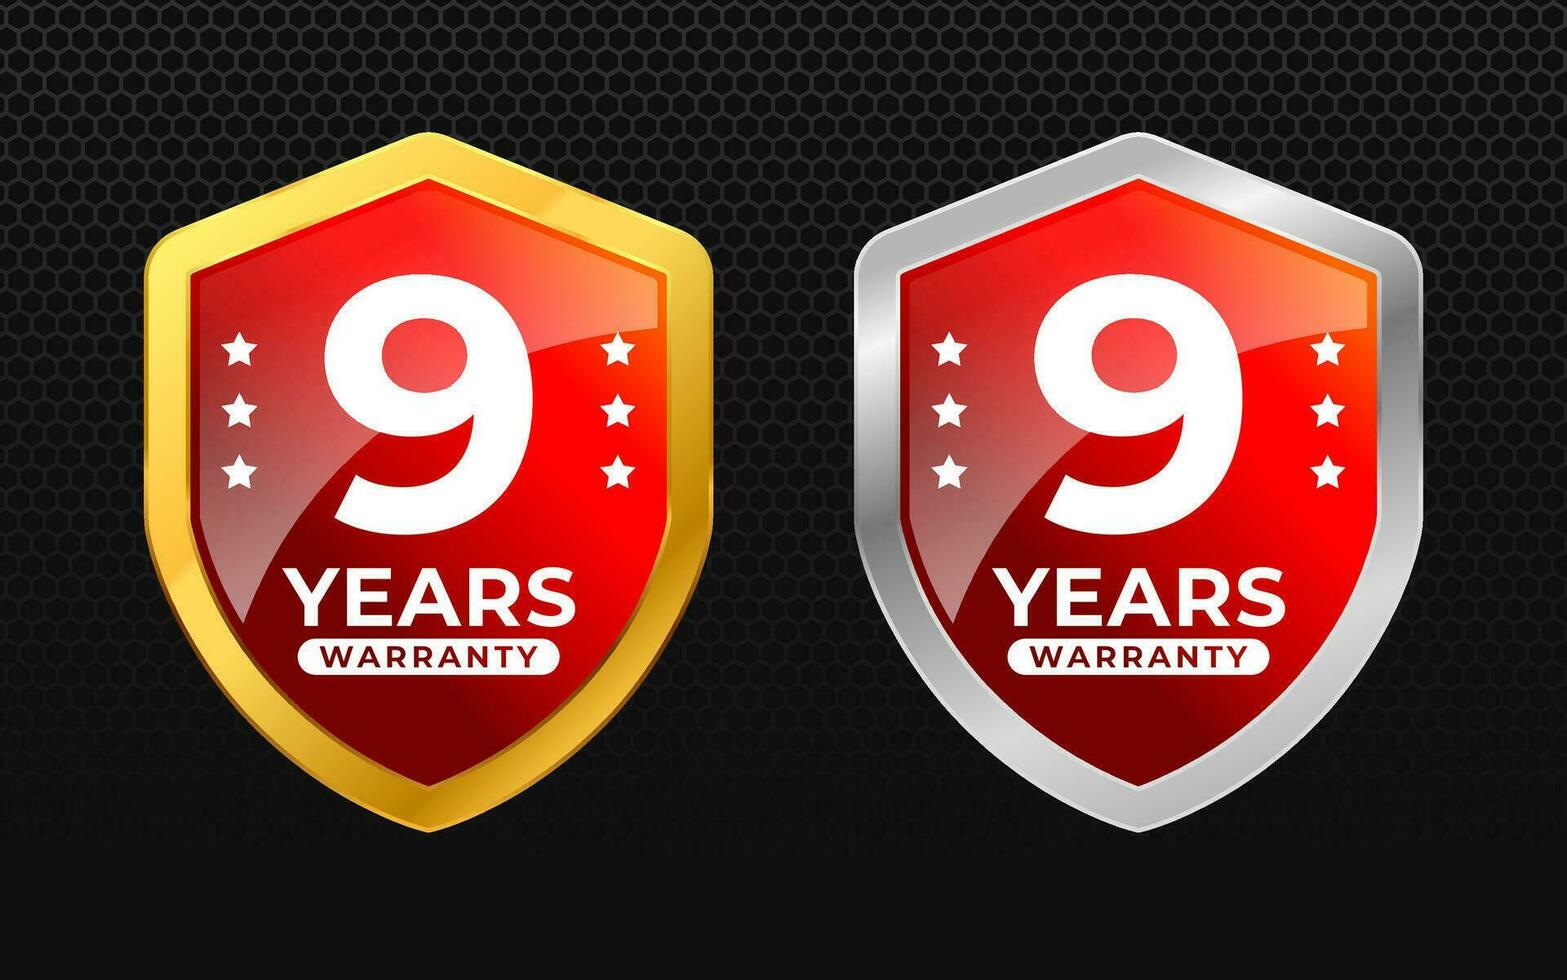 9 years warranty with glossy gold and silver vector shield shape. for label, seal, stamp, icon, logo, badge, symbol, sticker, button